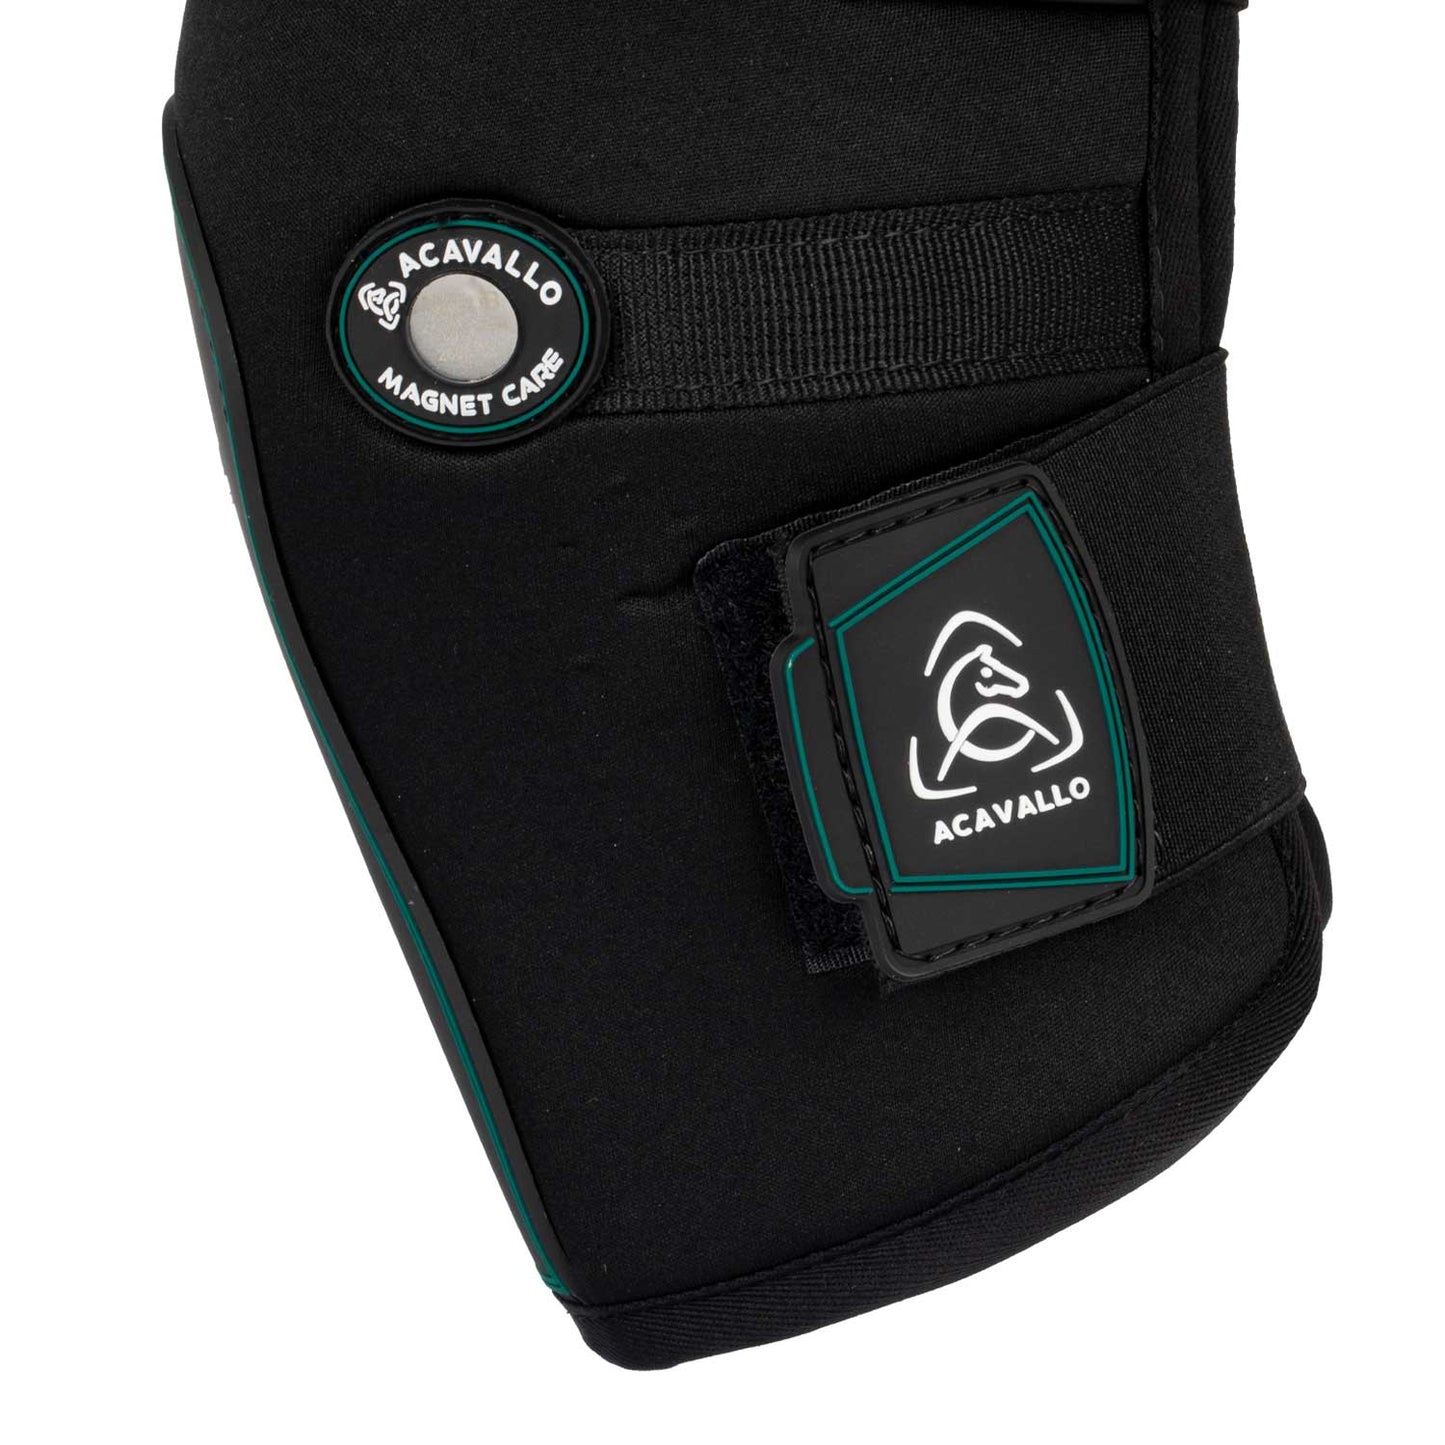 ACAVALLO - Magnetic Care Support Boot Hind